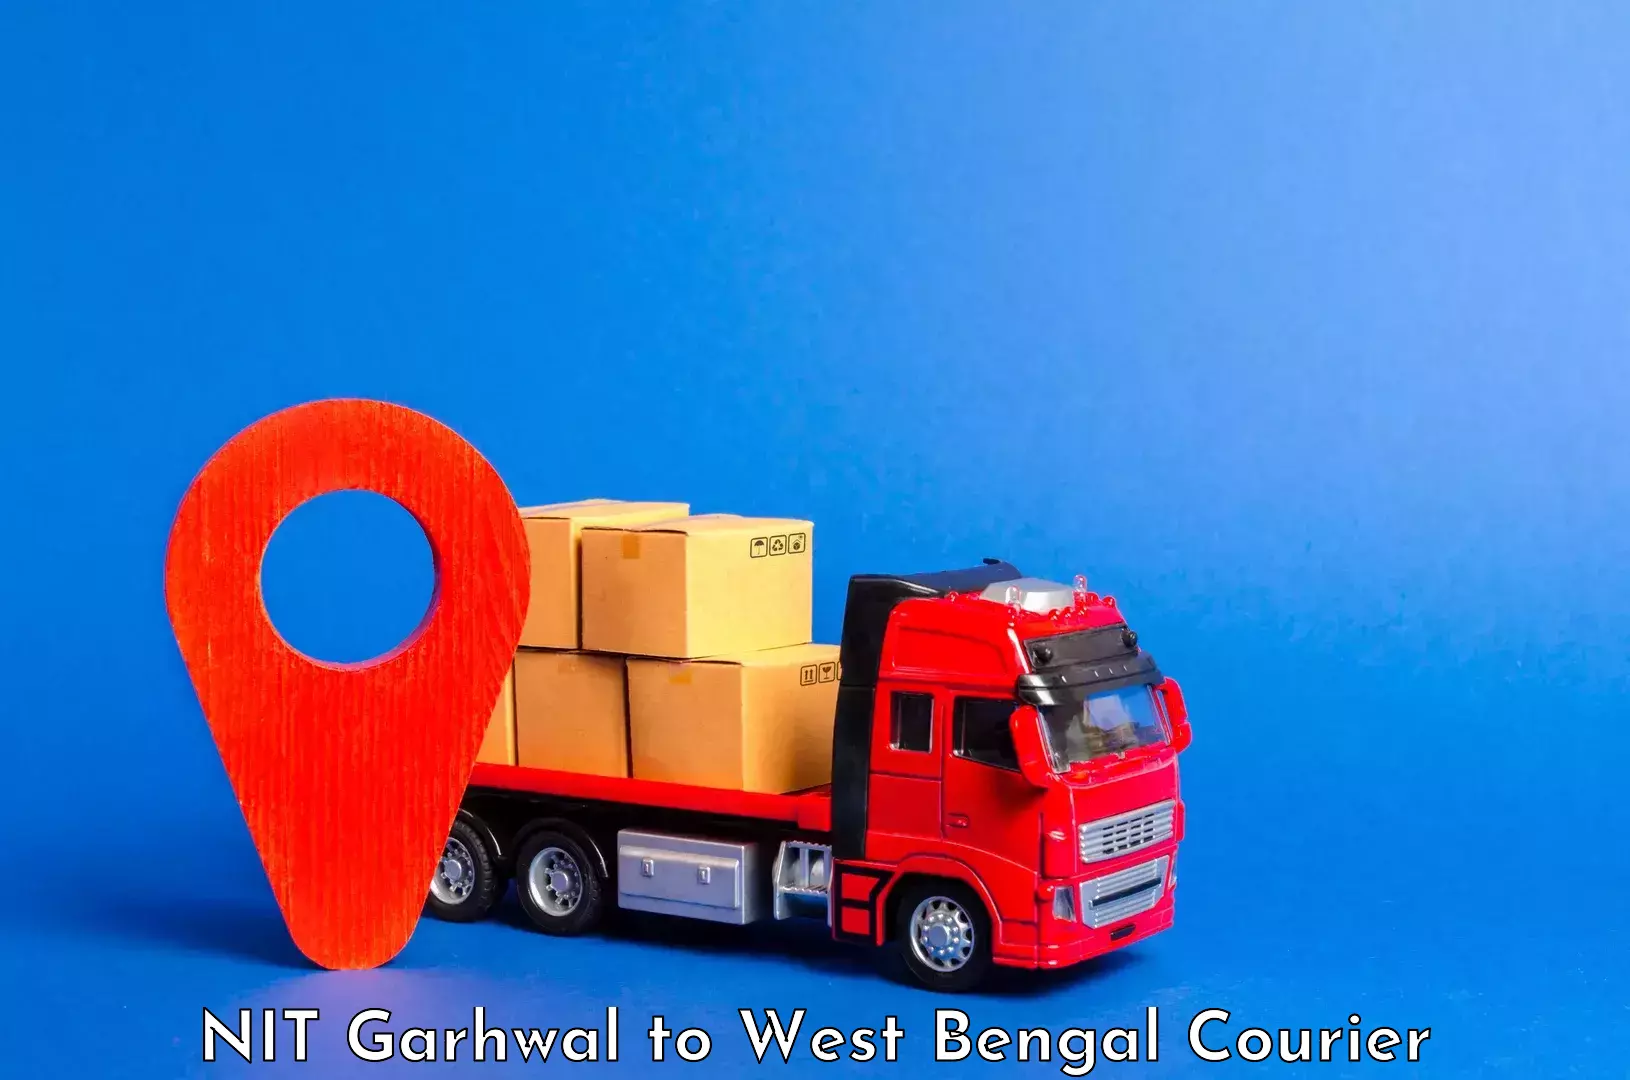 Same day luggage service NIT Garhwal to West Bengal